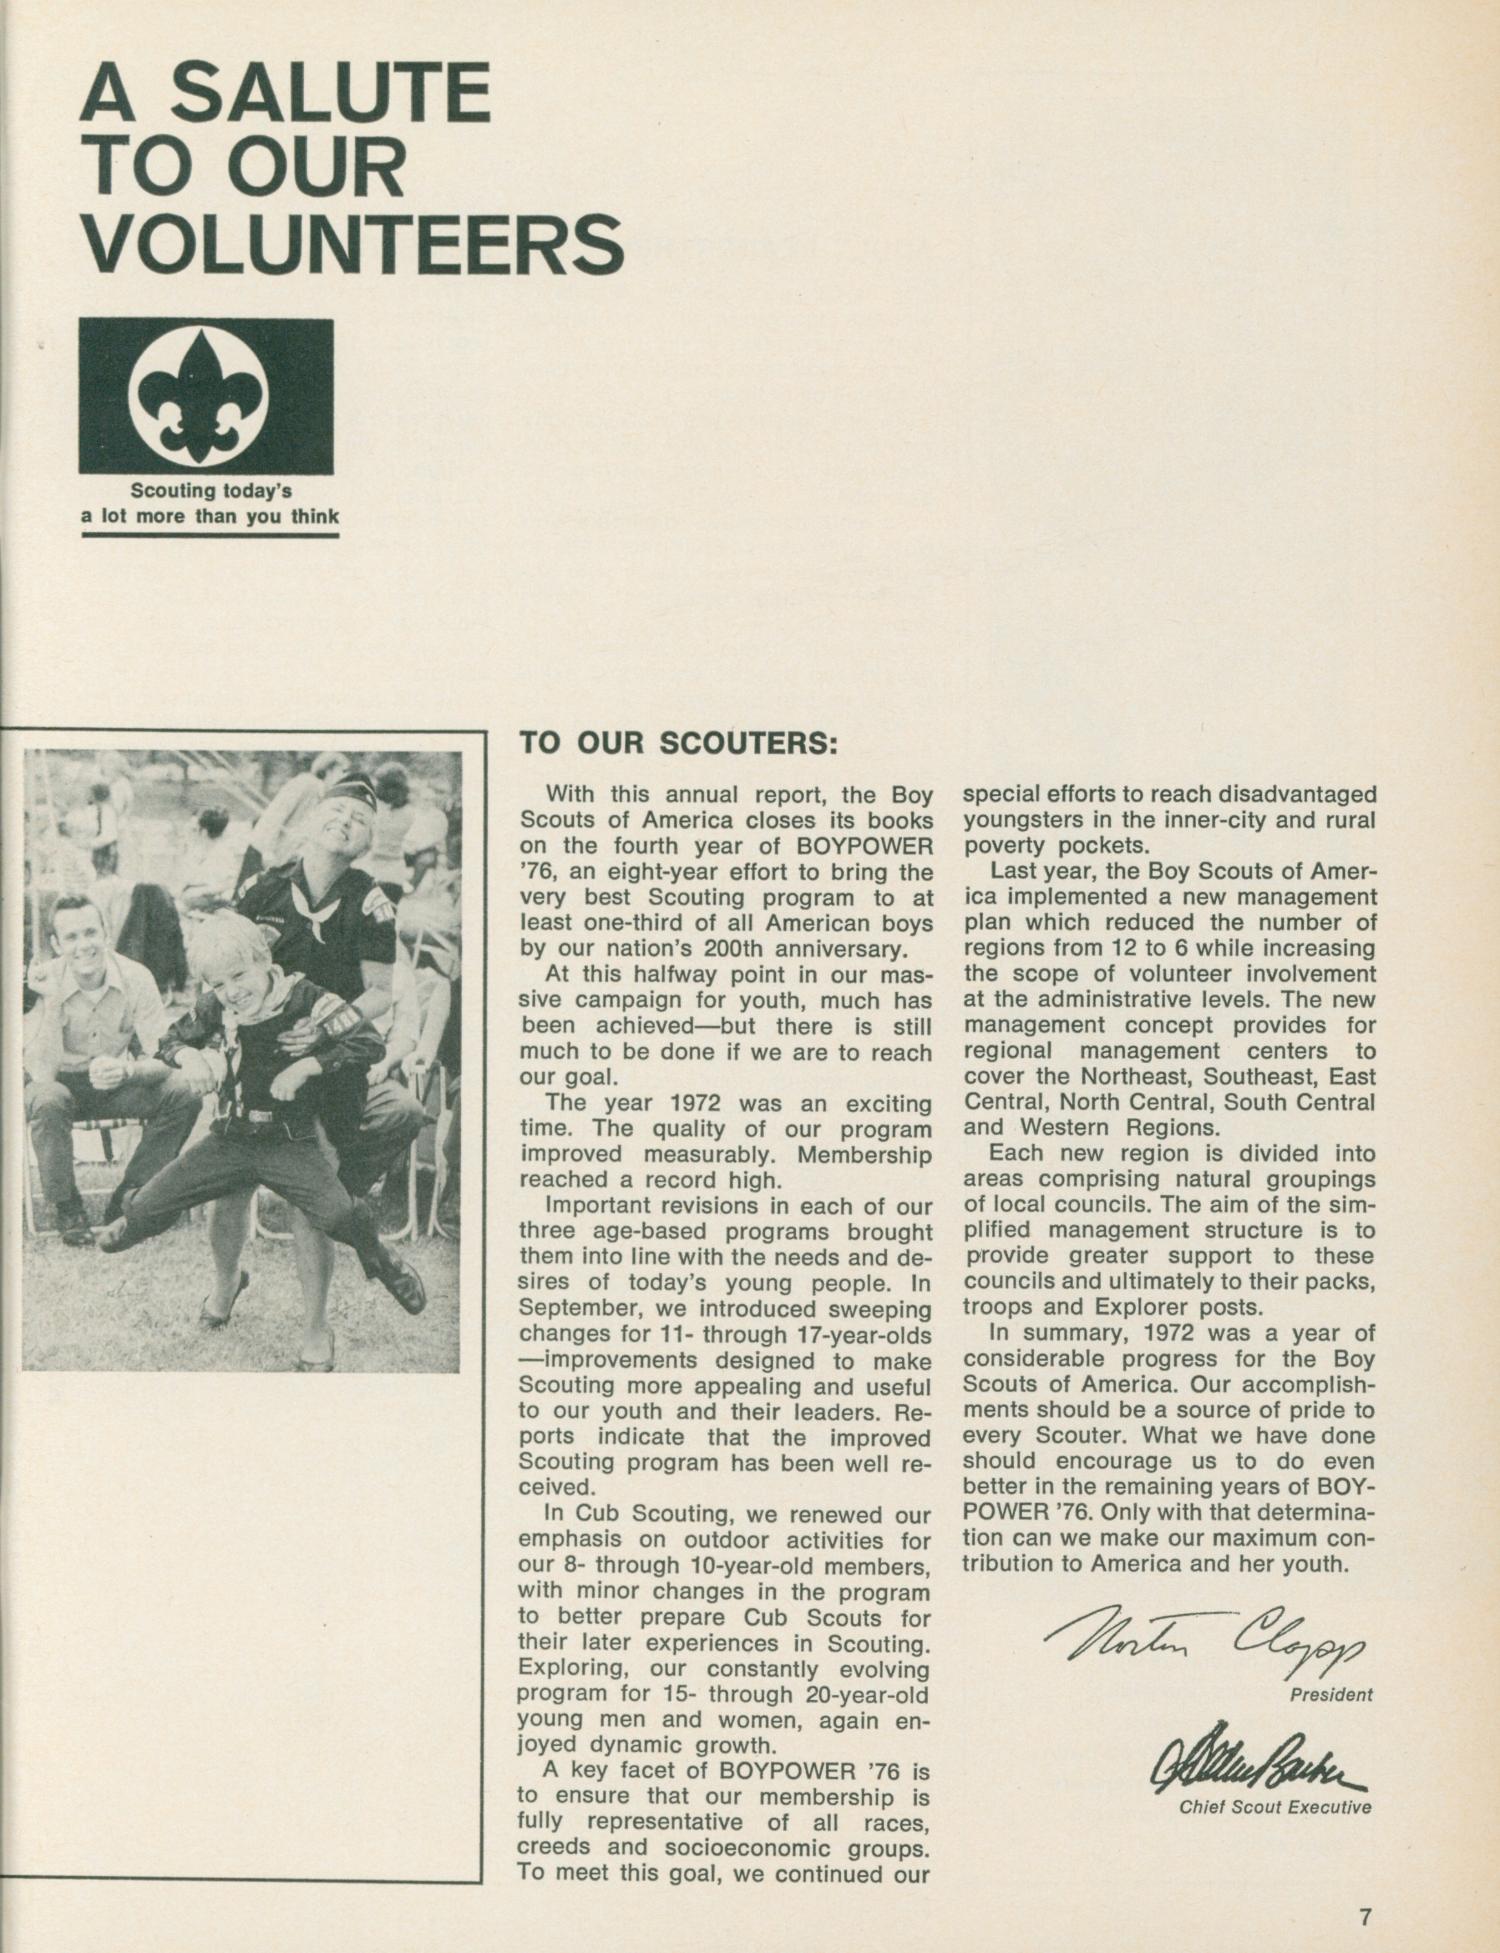 Scouting, Volume 61, Number 4, May-June 1973
                                                
                                                    7
                                                